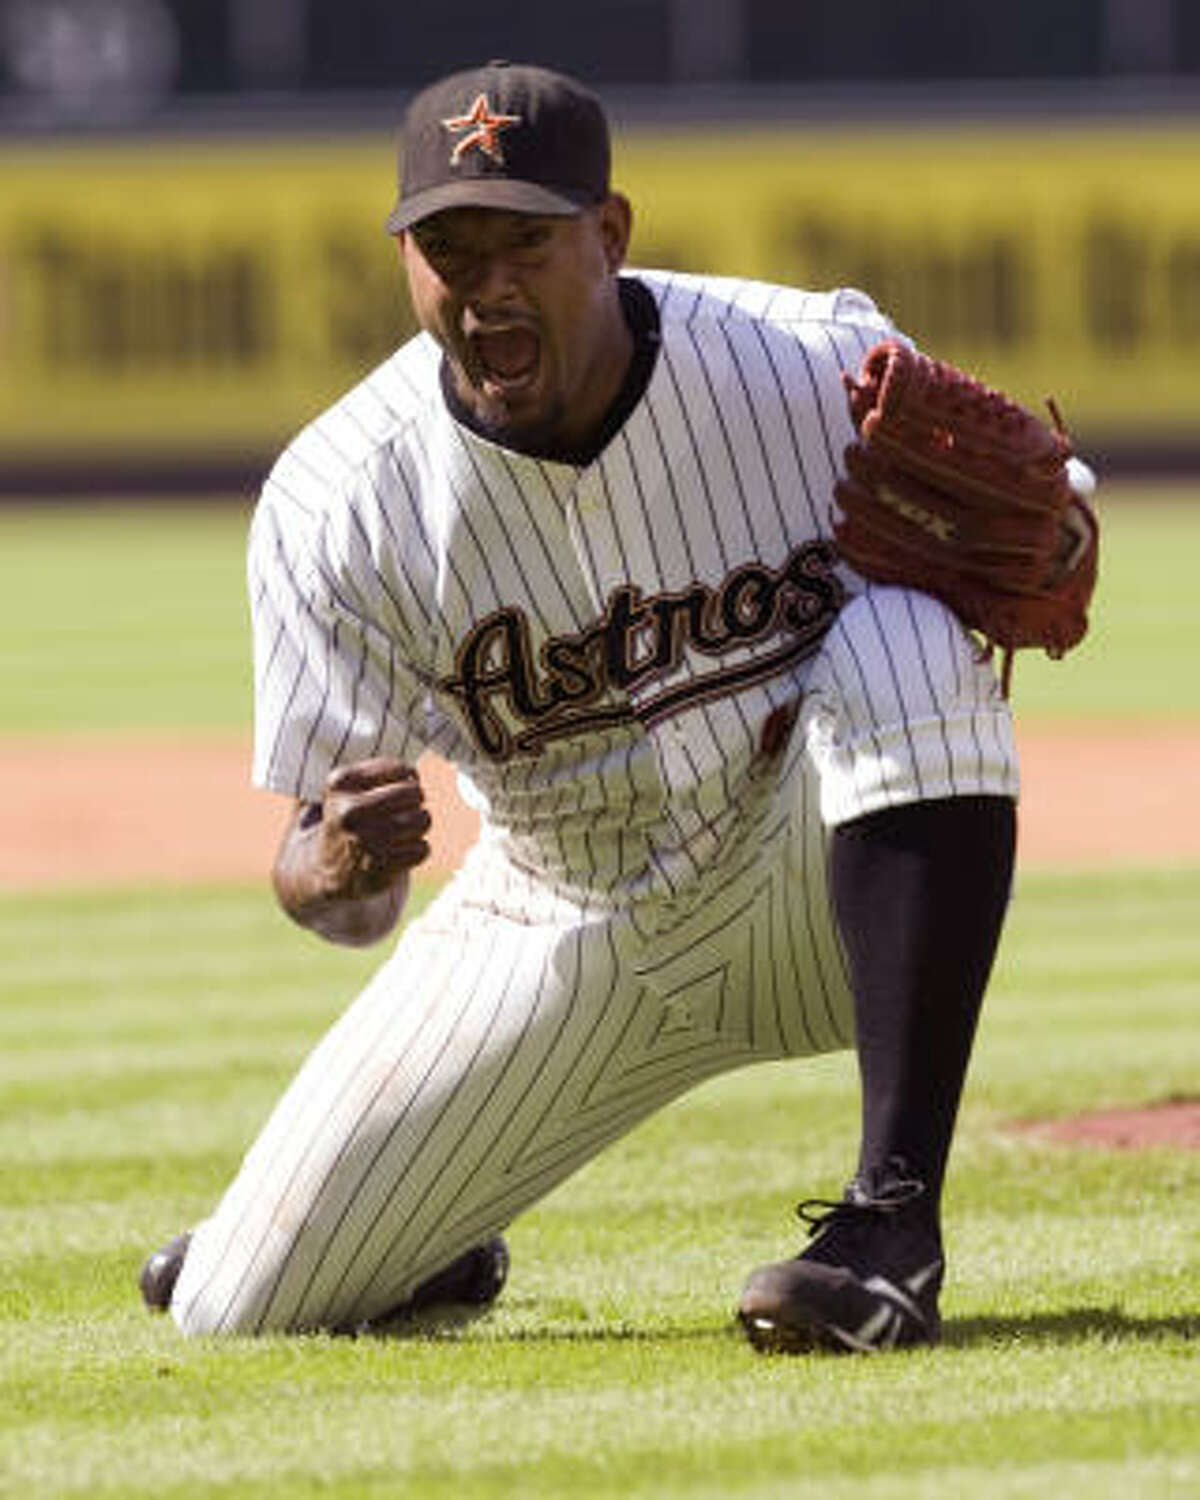 Astros closer Jose Valverde led the National League with 44 saves last season.